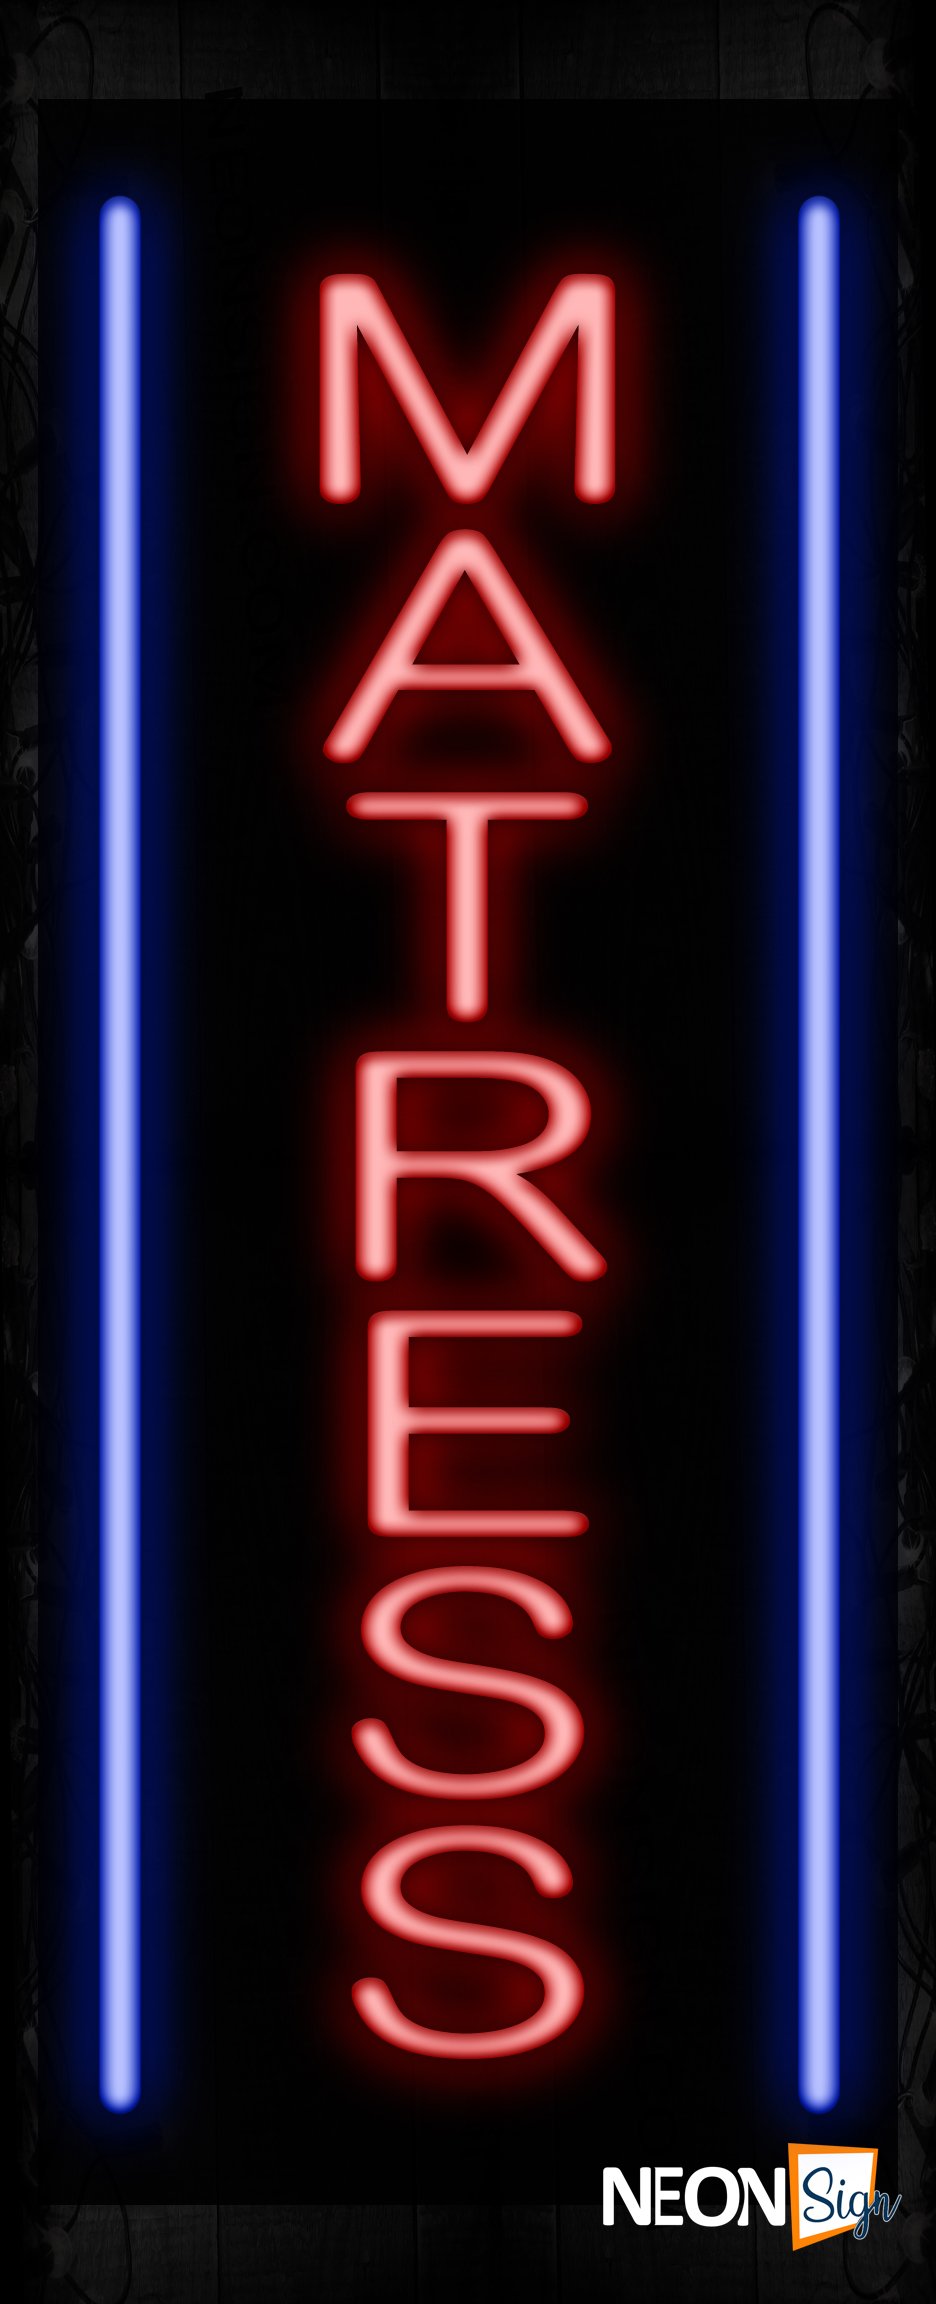 Image of 11590 Mattress in red with blue border Neon Sign_32 x12 Black Backing